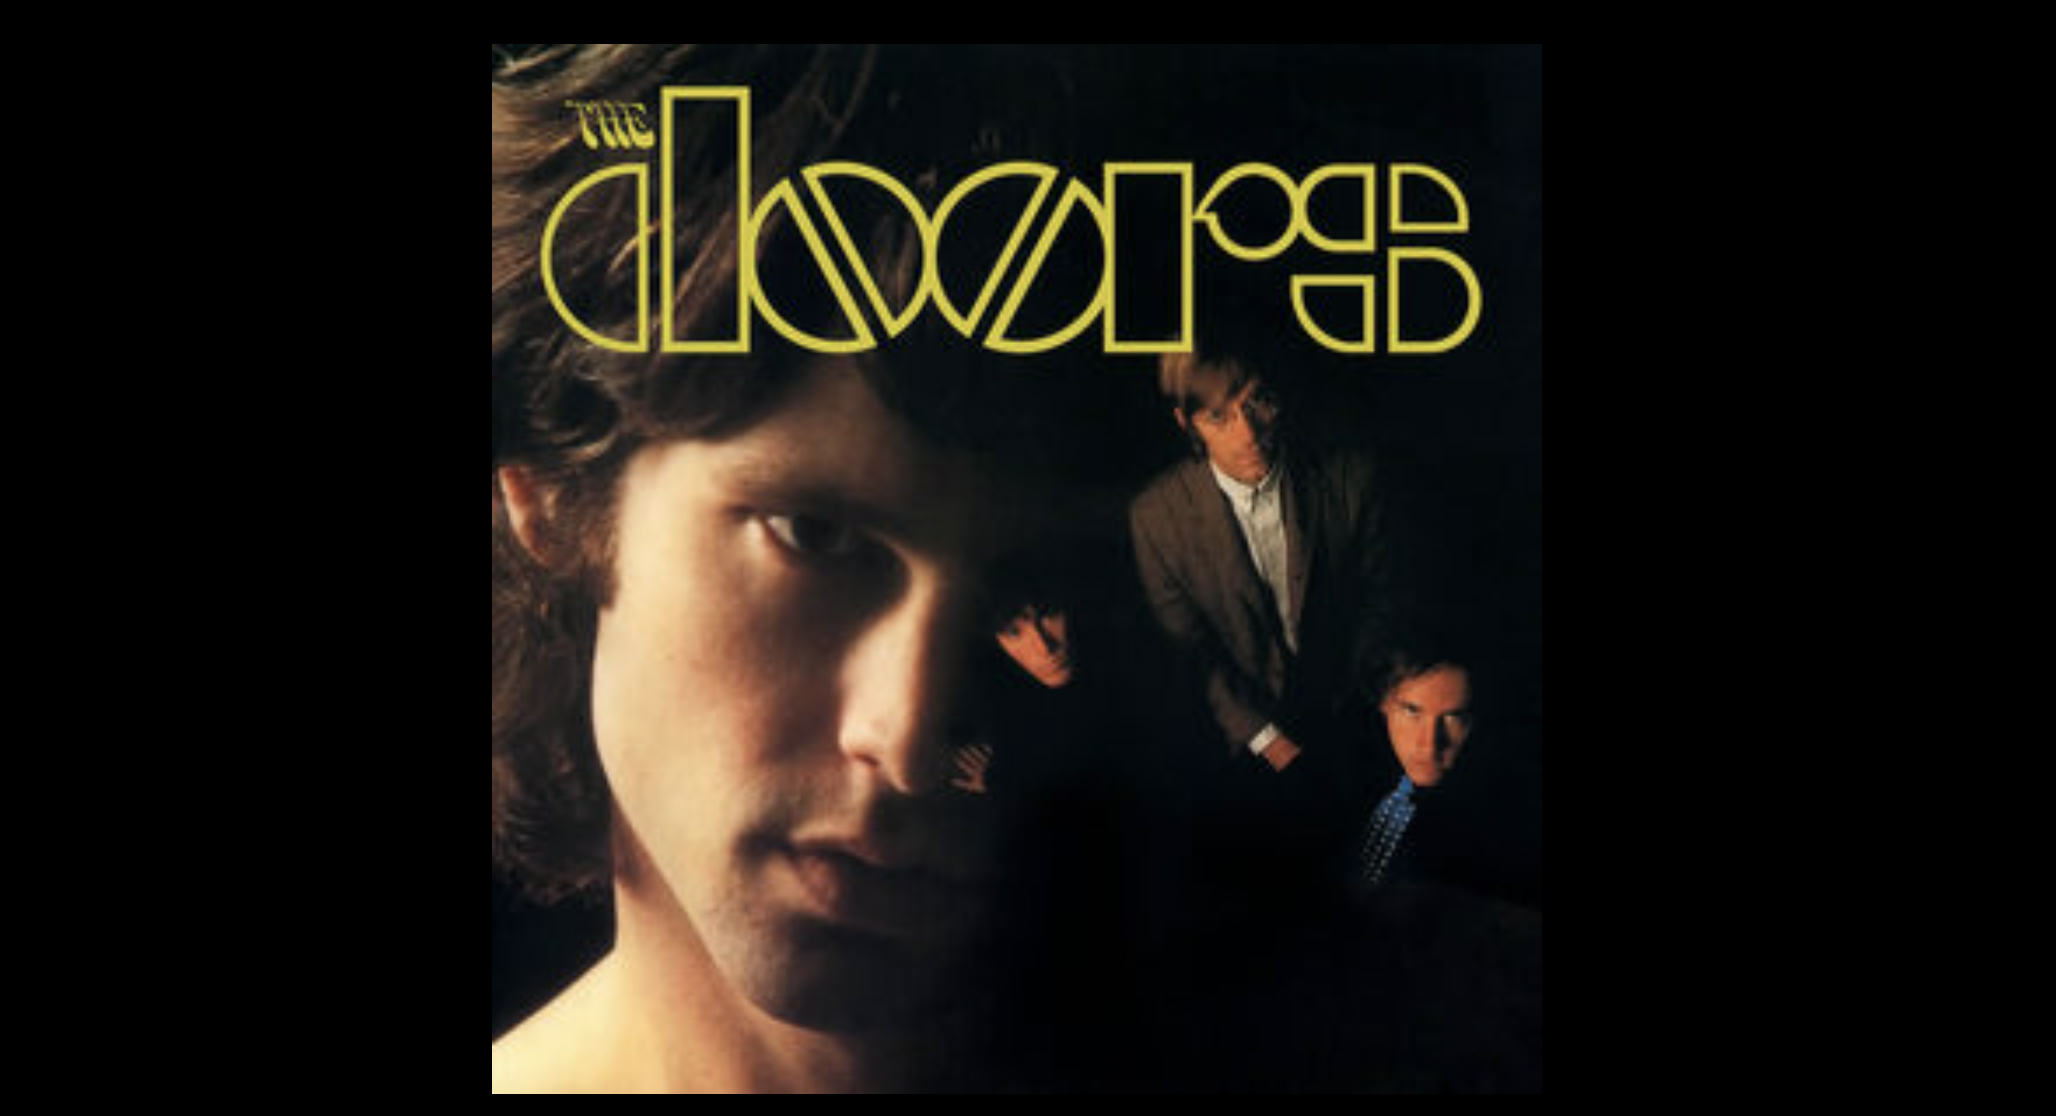 <p>The Doors' self-titled album, released in 1967, was a groundbreaking debut featuring the hit "Light My Fire." With over 12 million copies sold, it's not only a commercial success but also a cultural touchstone that encapsulates the psychedelic rock era.</p>